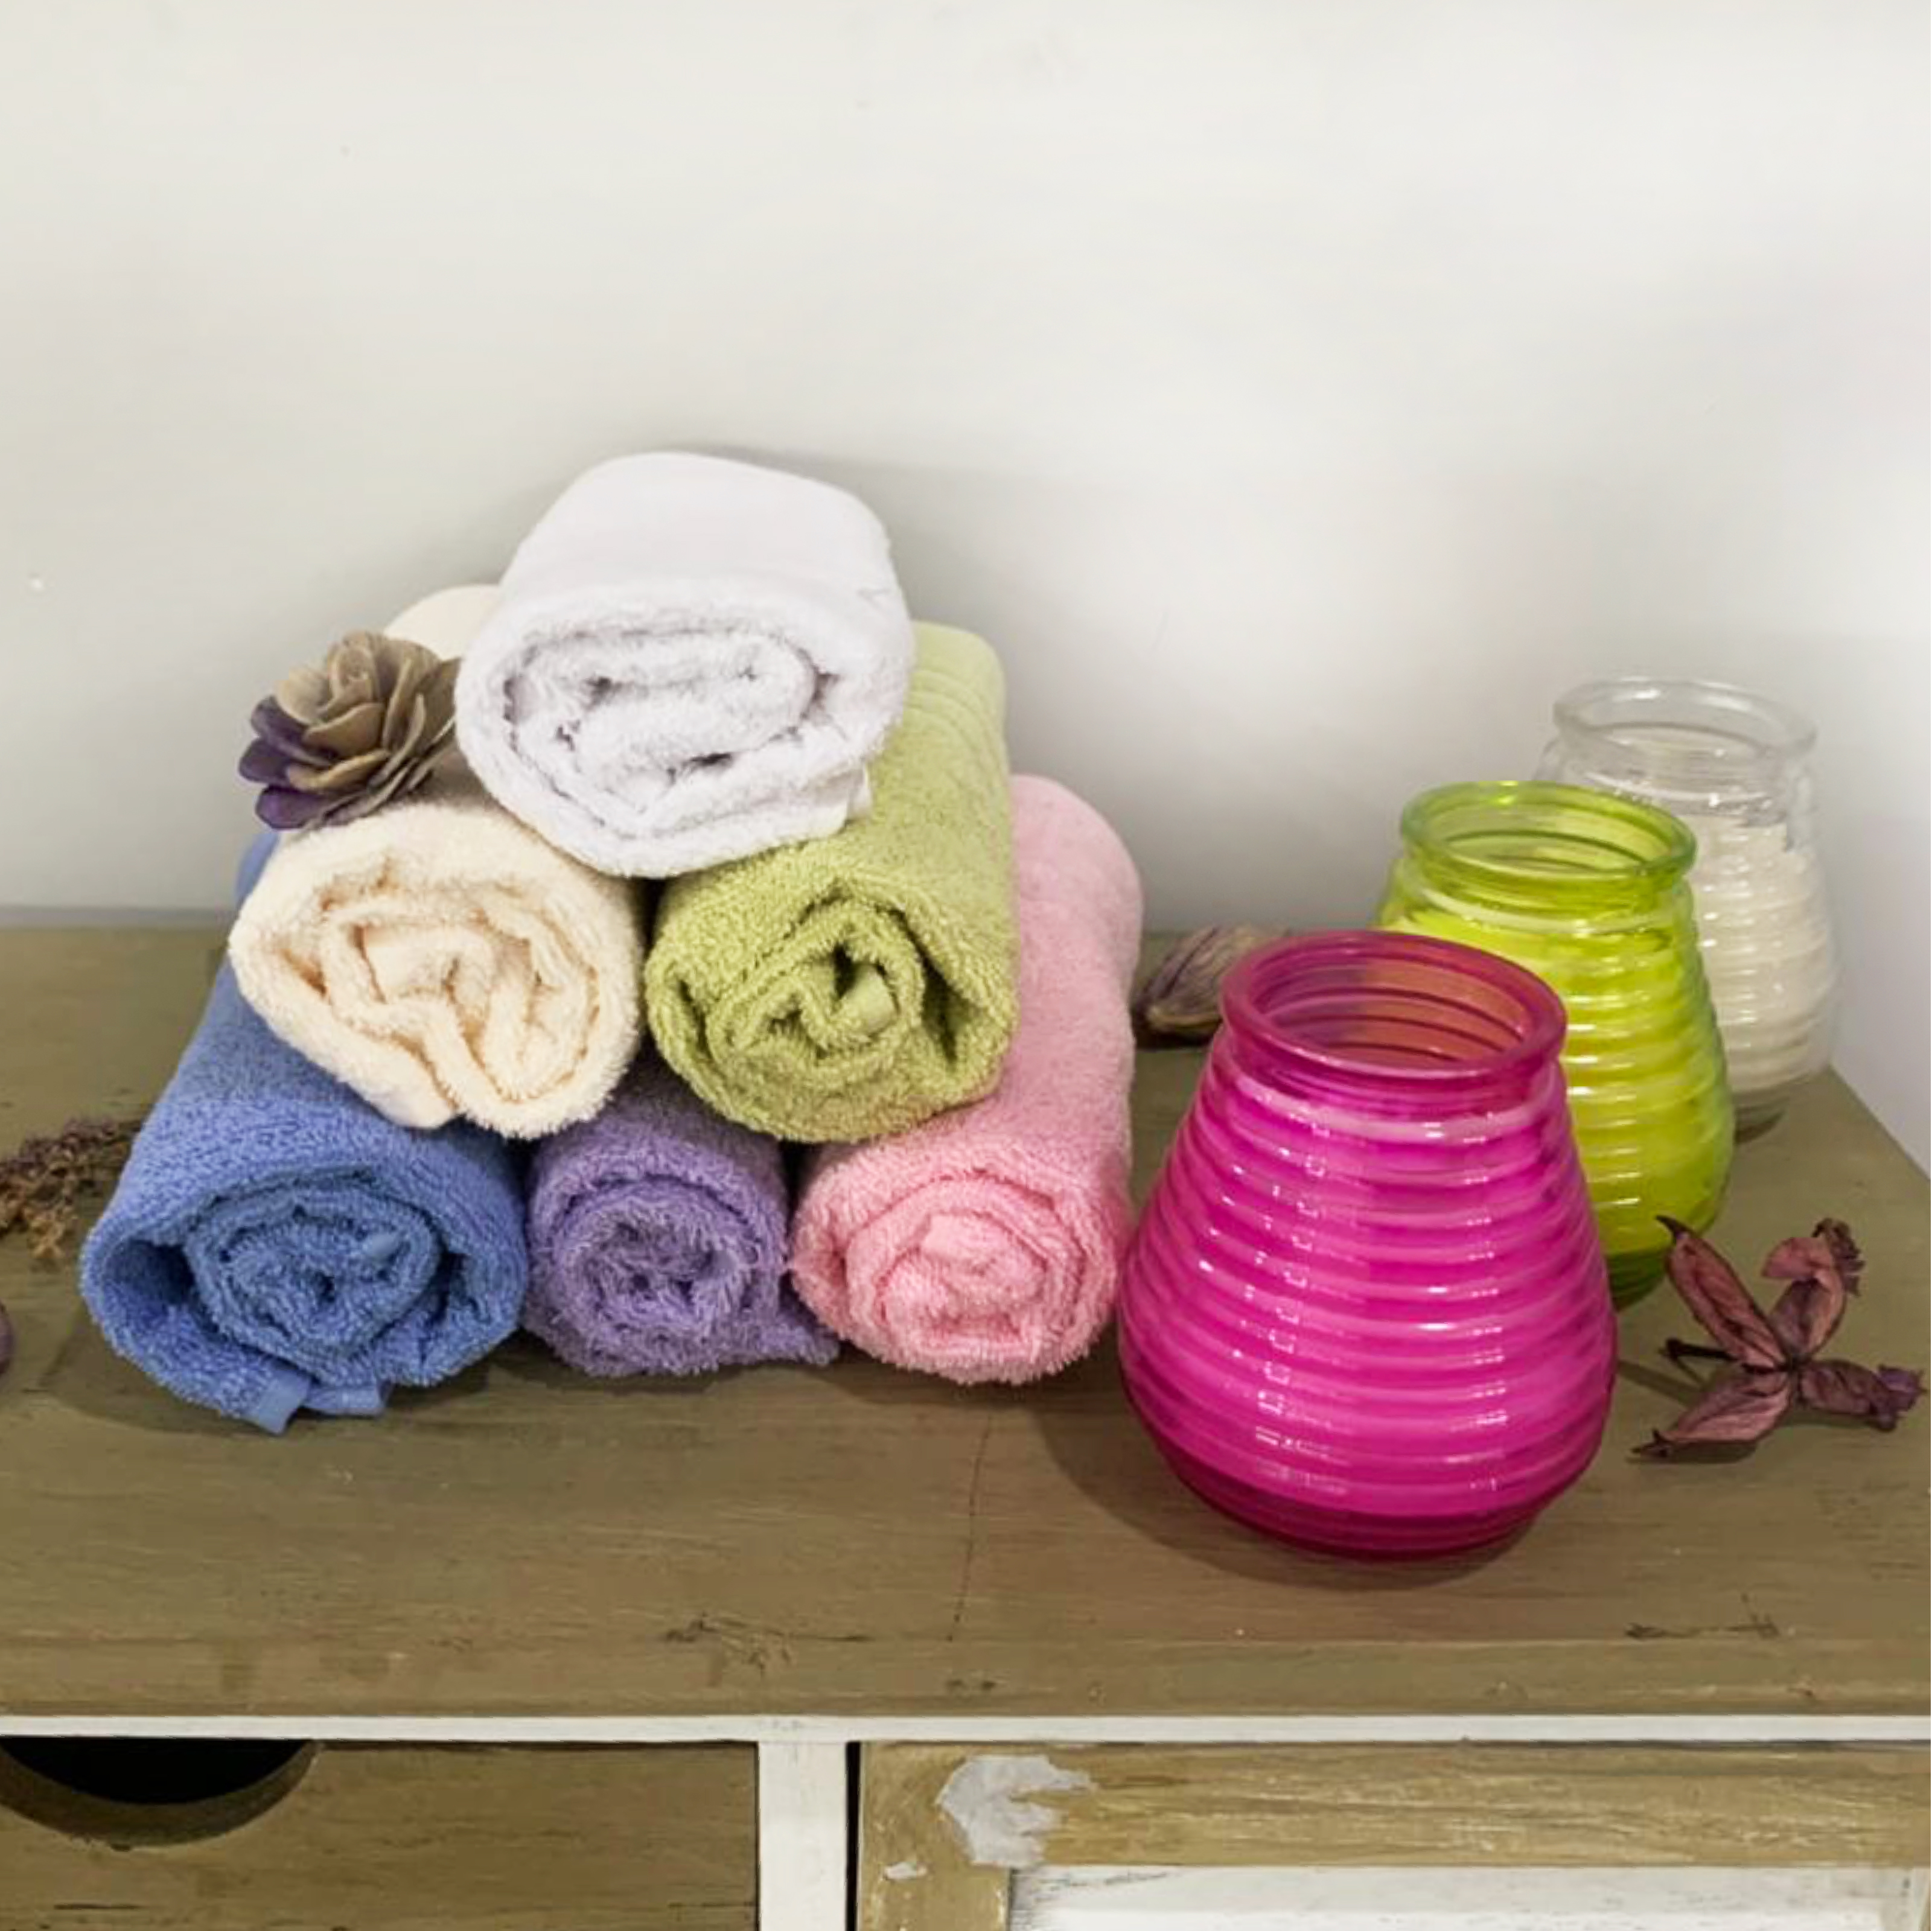 Coventry Bath Towel, 1 Piece 45x60cm 100% Cotton Available in Colors